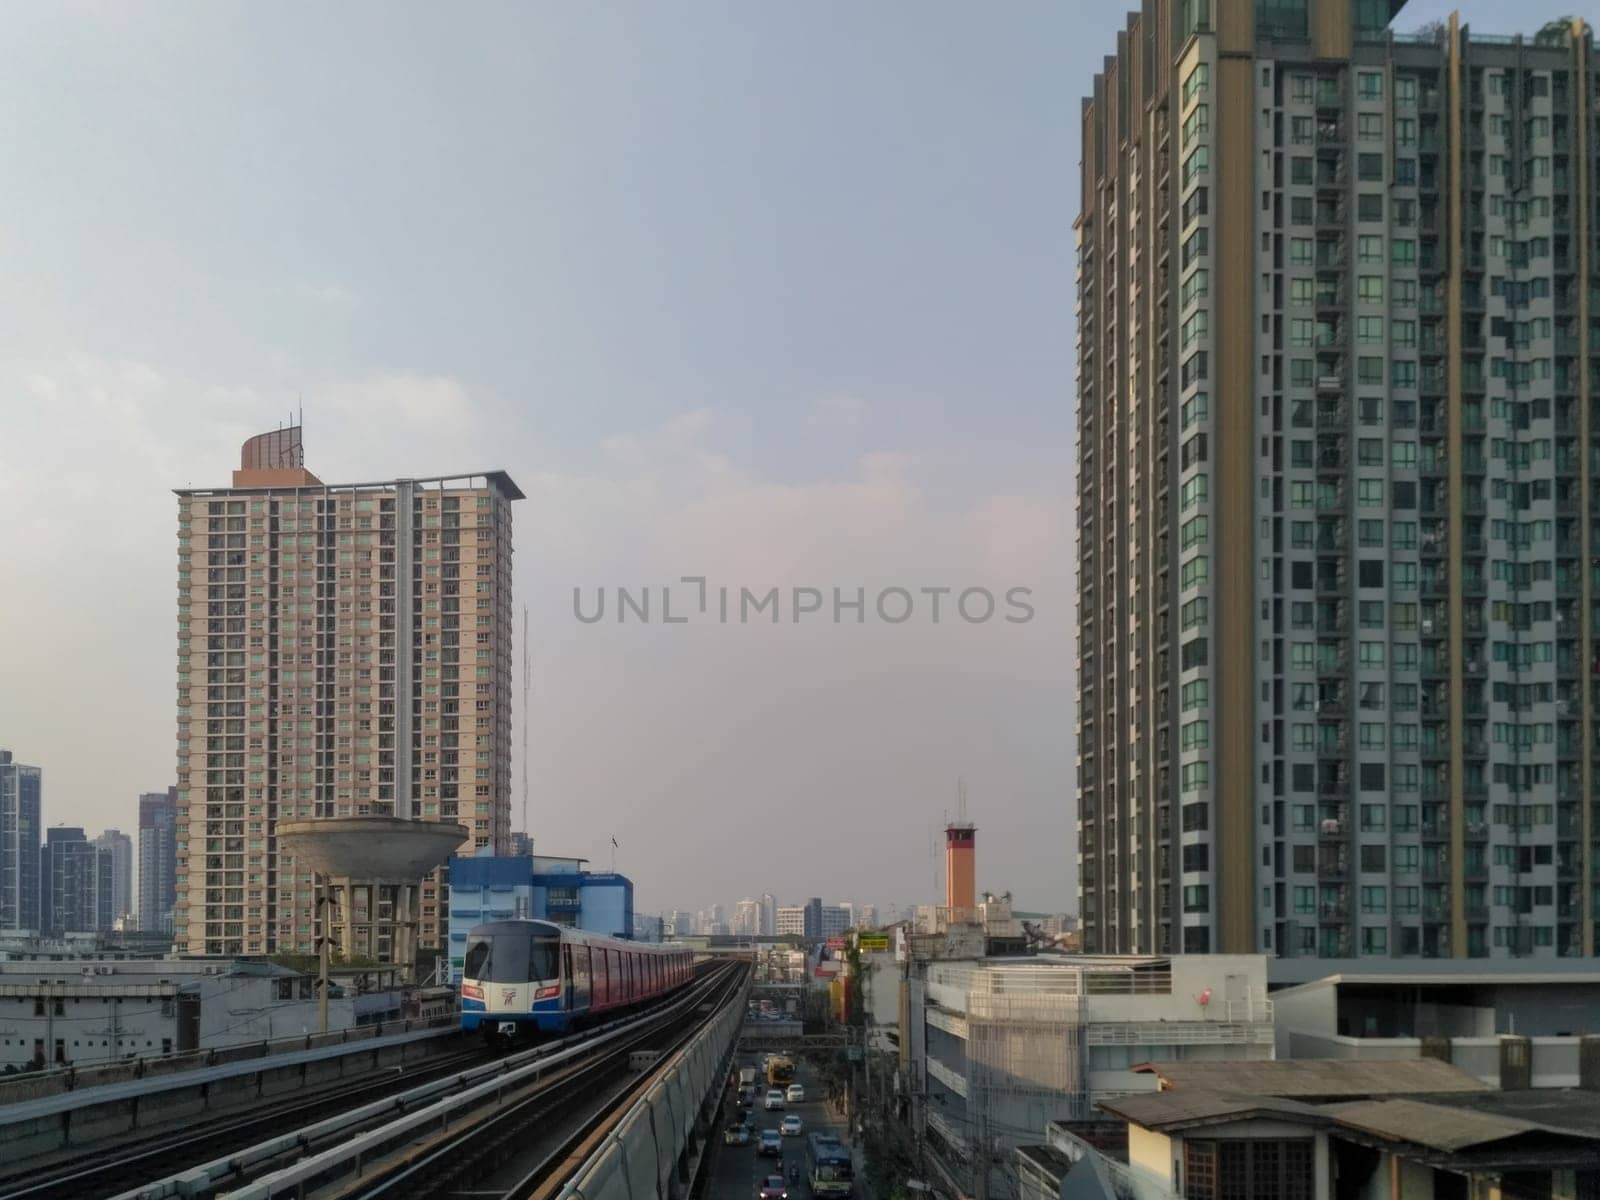 BTS Sky Train is running in downtown of Bangkok. Sky train is fastest transport mode in Bangkok by Andre1ns